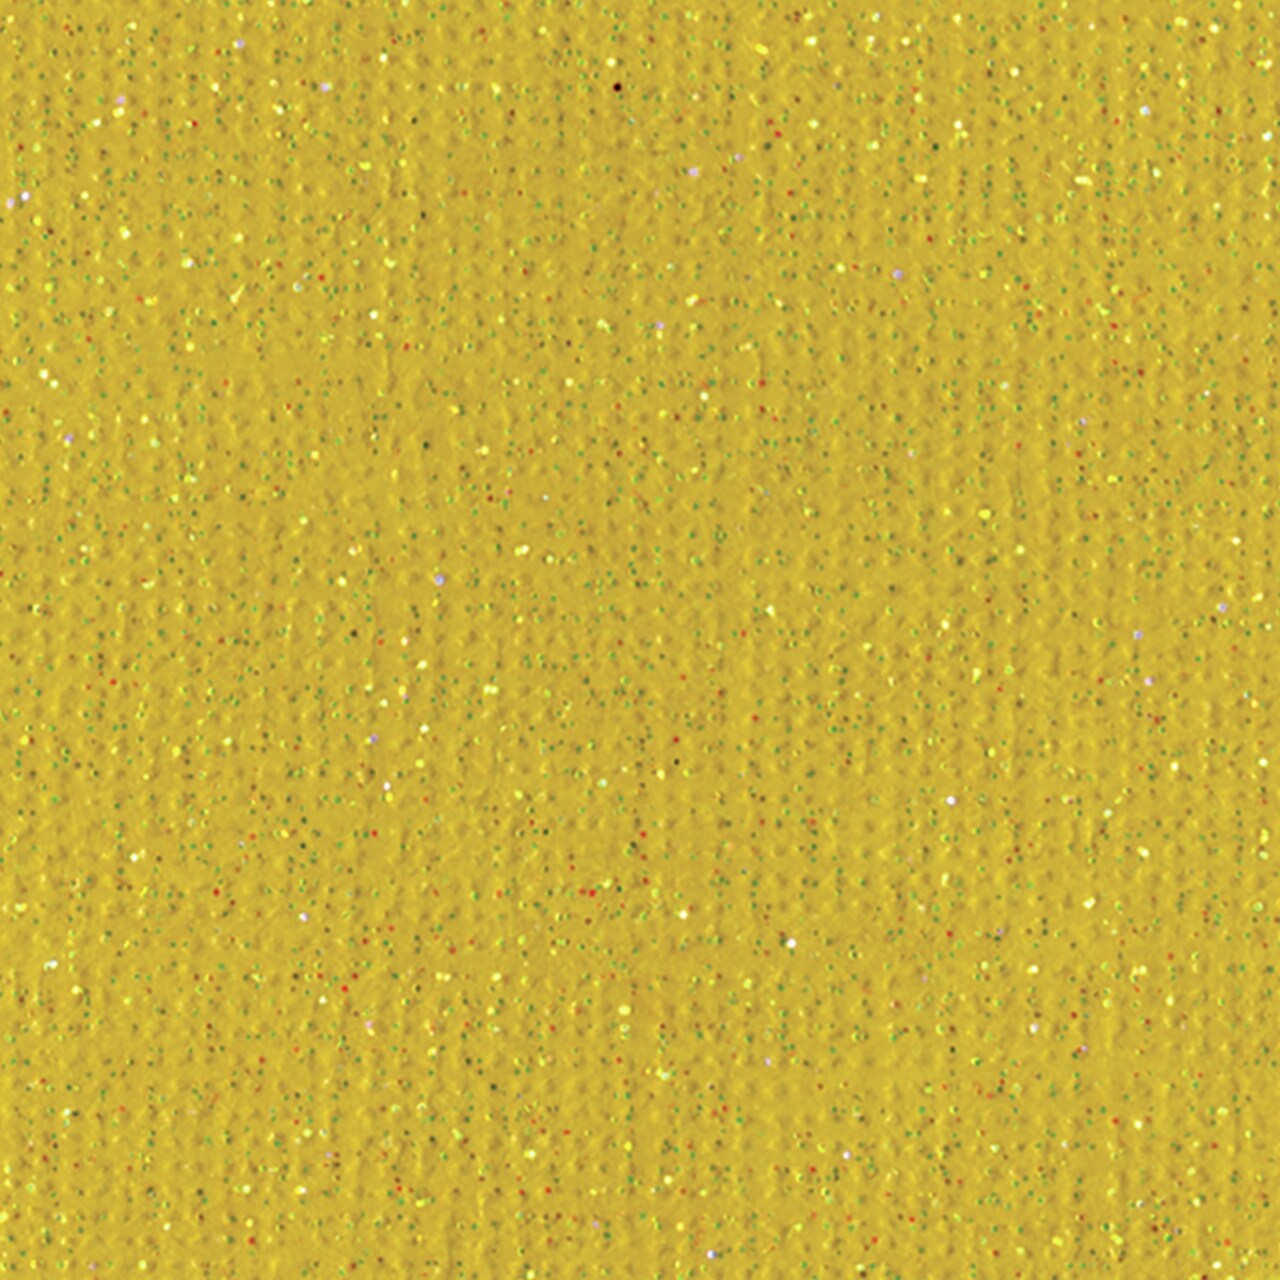 OSCAR - 12x12 Golden Yellow Glittered Cardstock by Core'dinations- 80 lb Paper